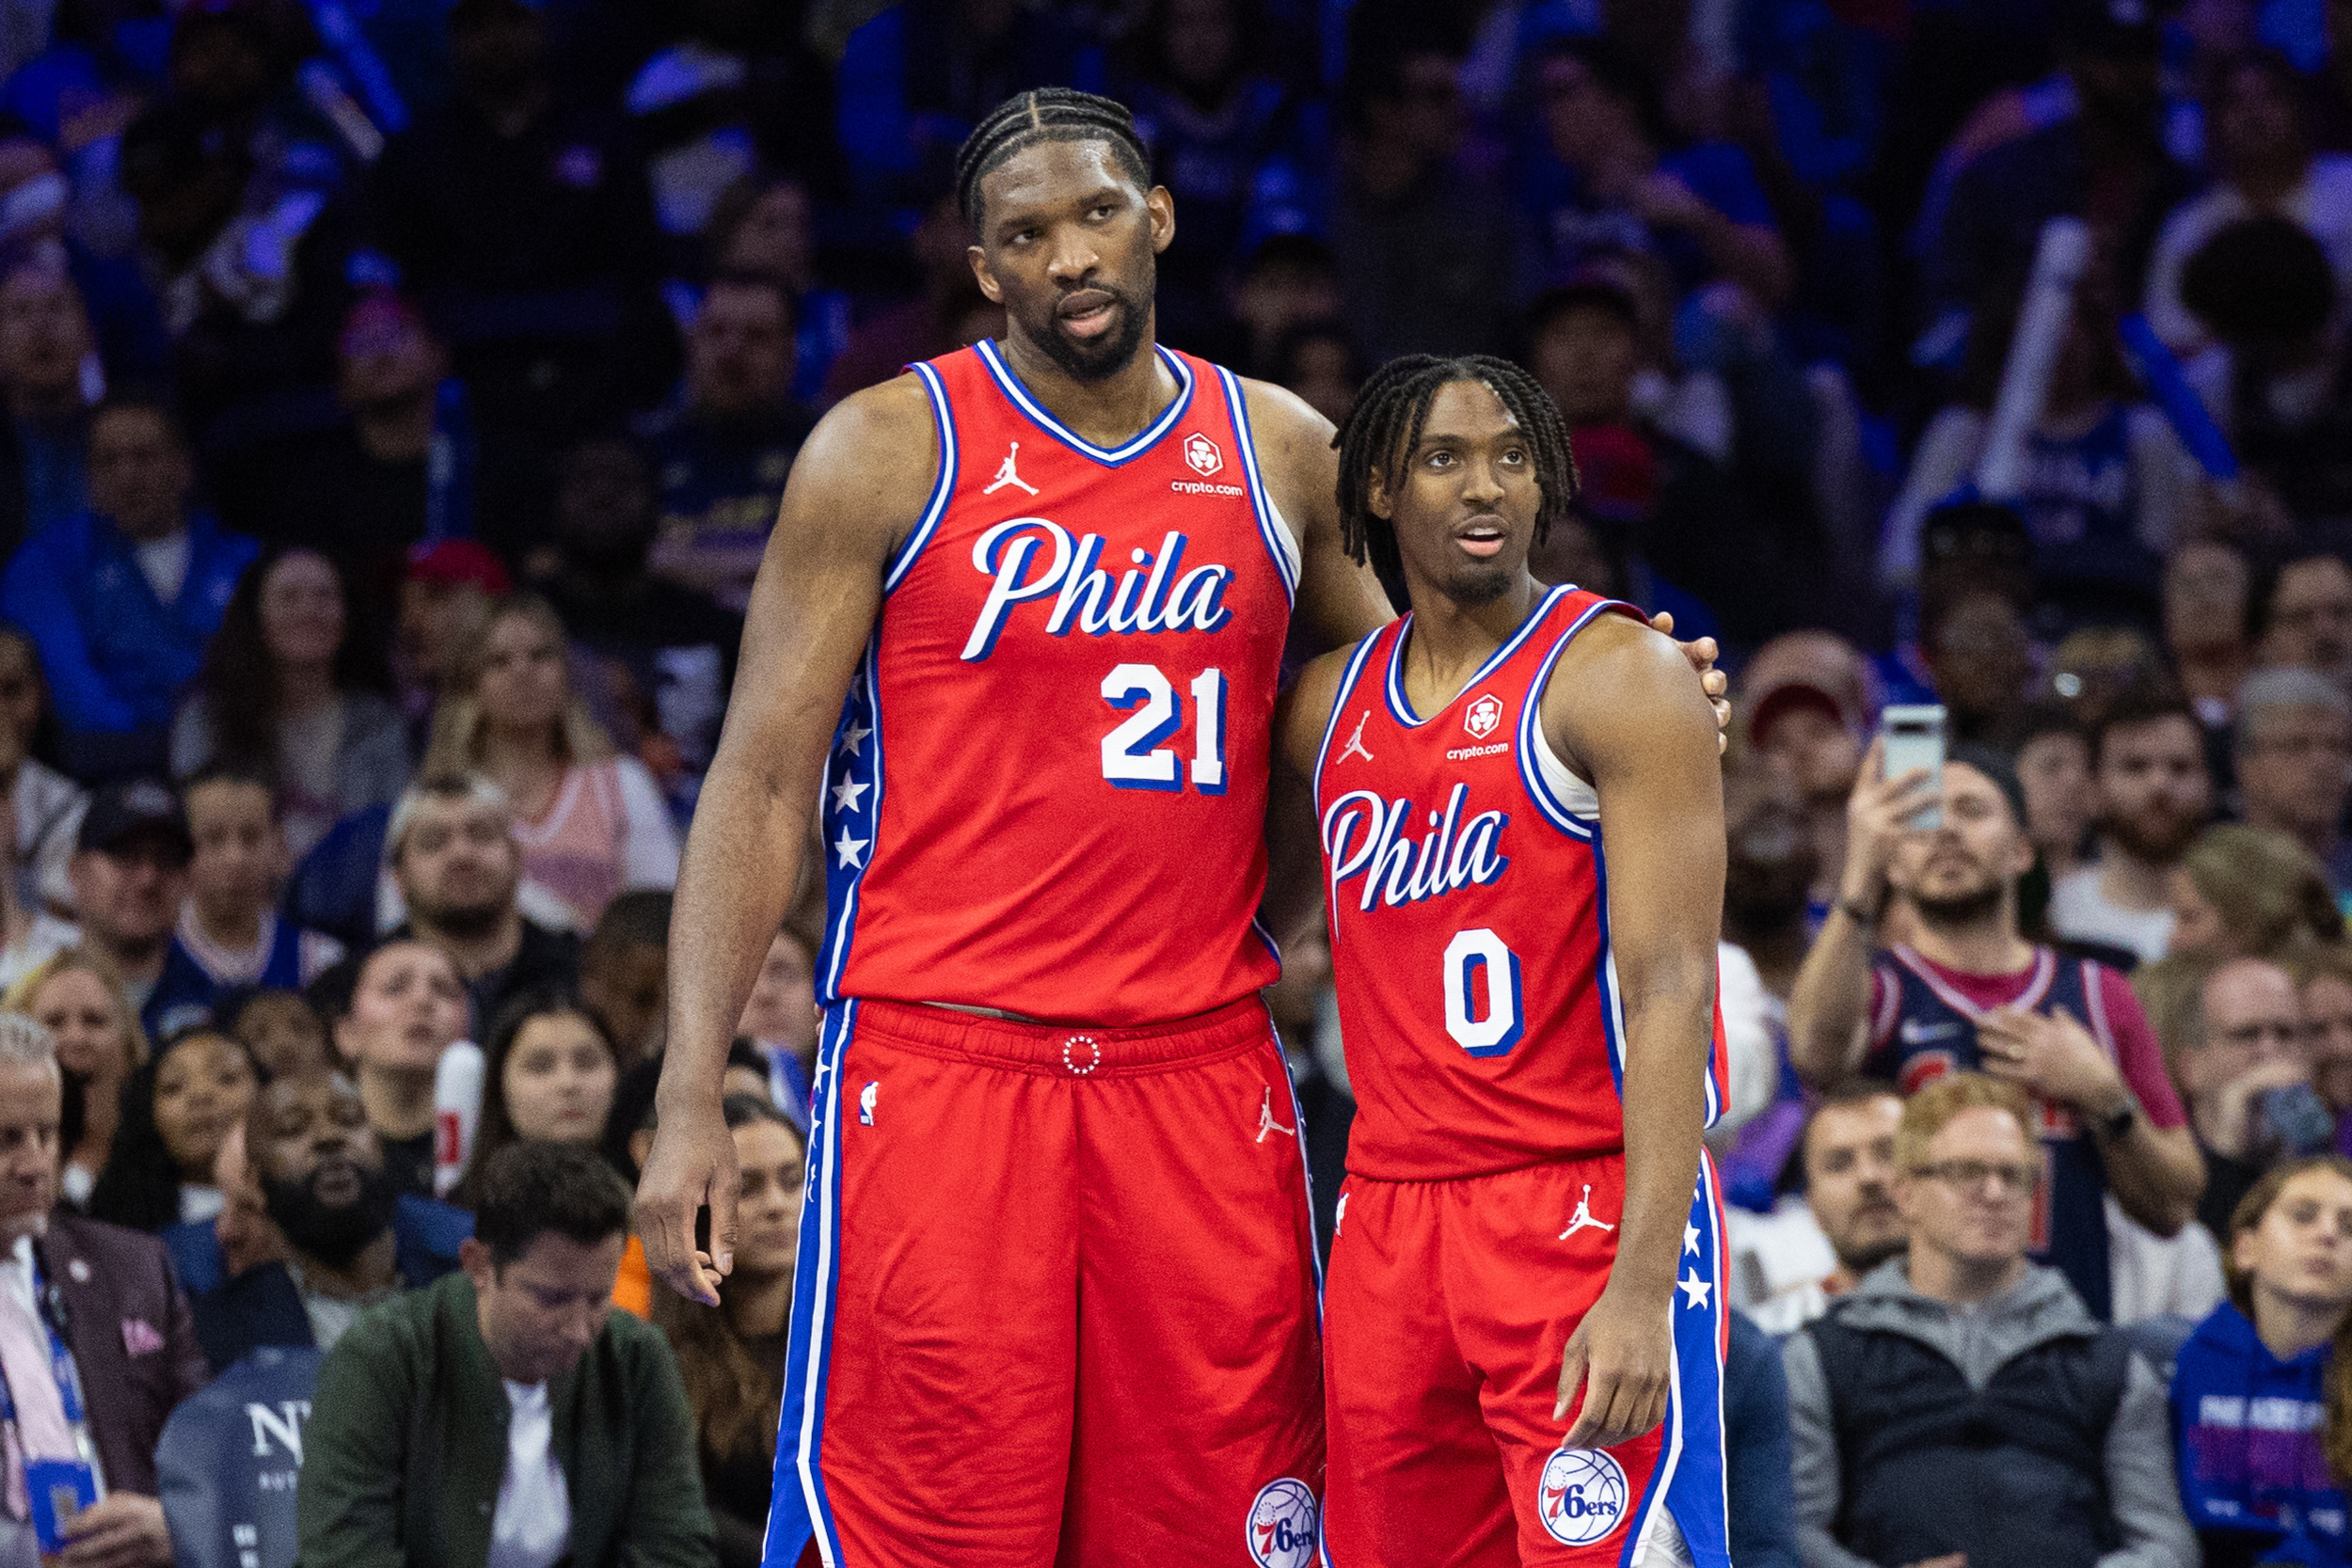 joel embiid, 76ers have a good chance to avoid play-in